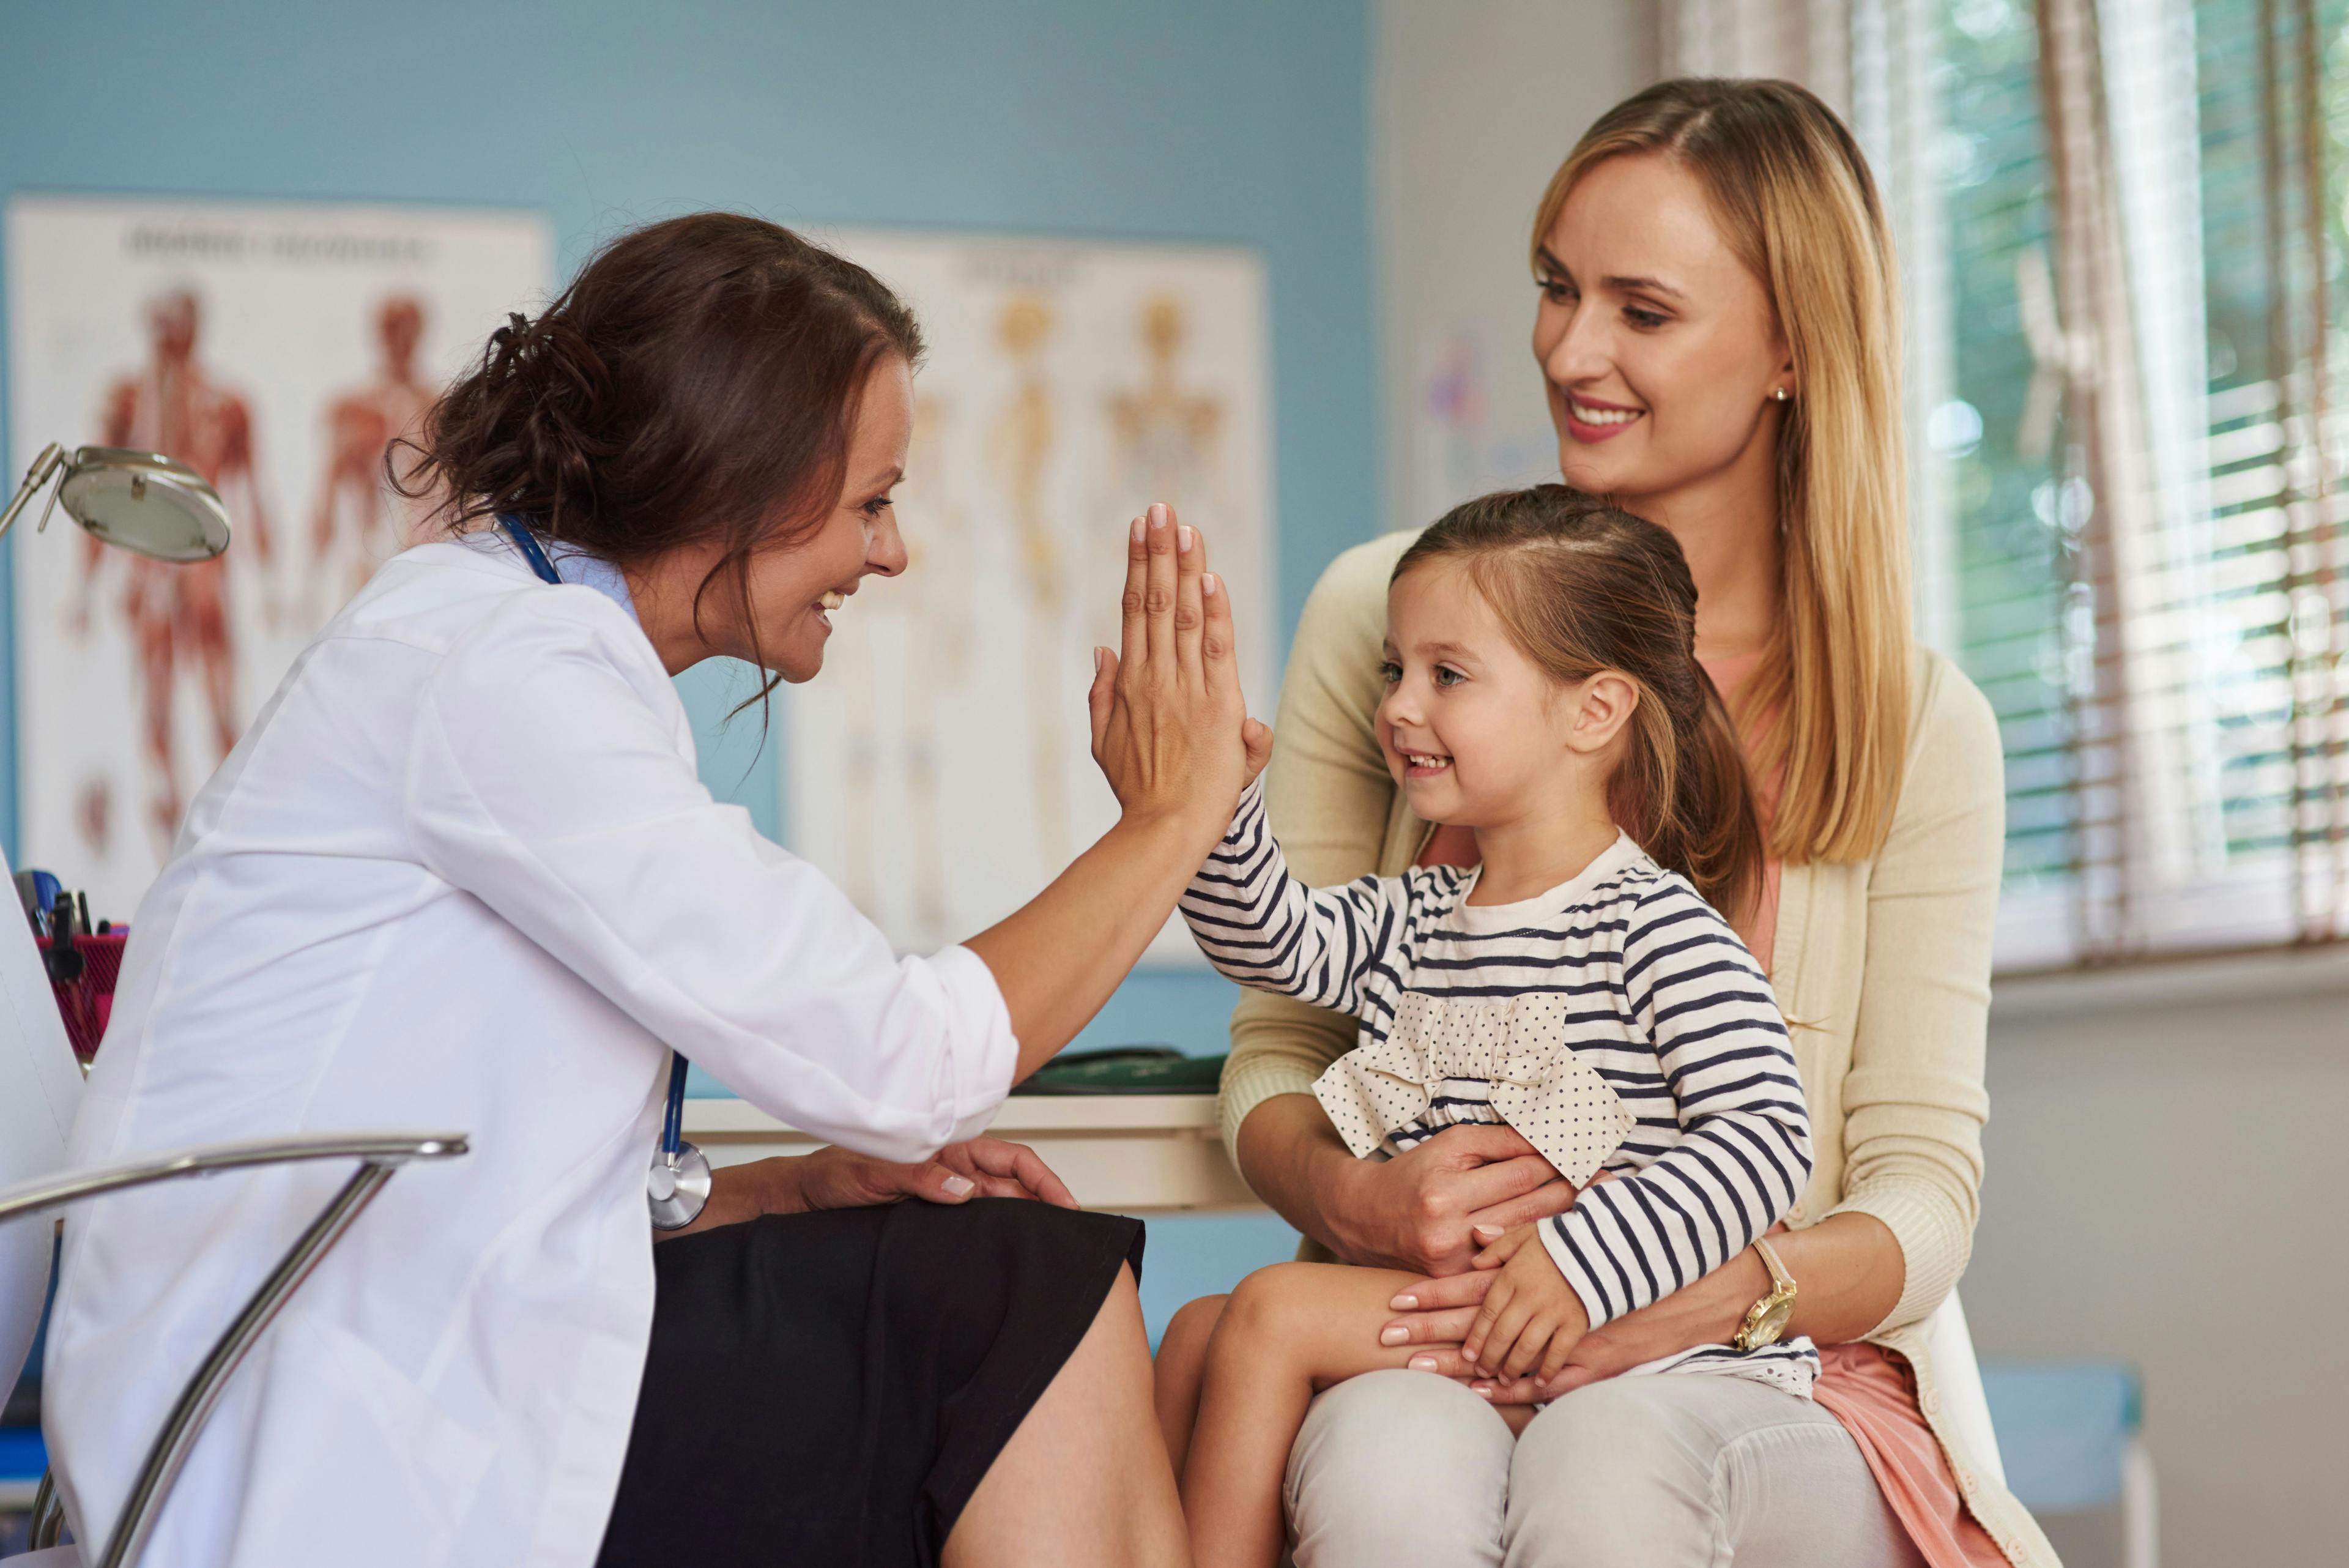 Poll shows how parents prepare for their child’s well visits